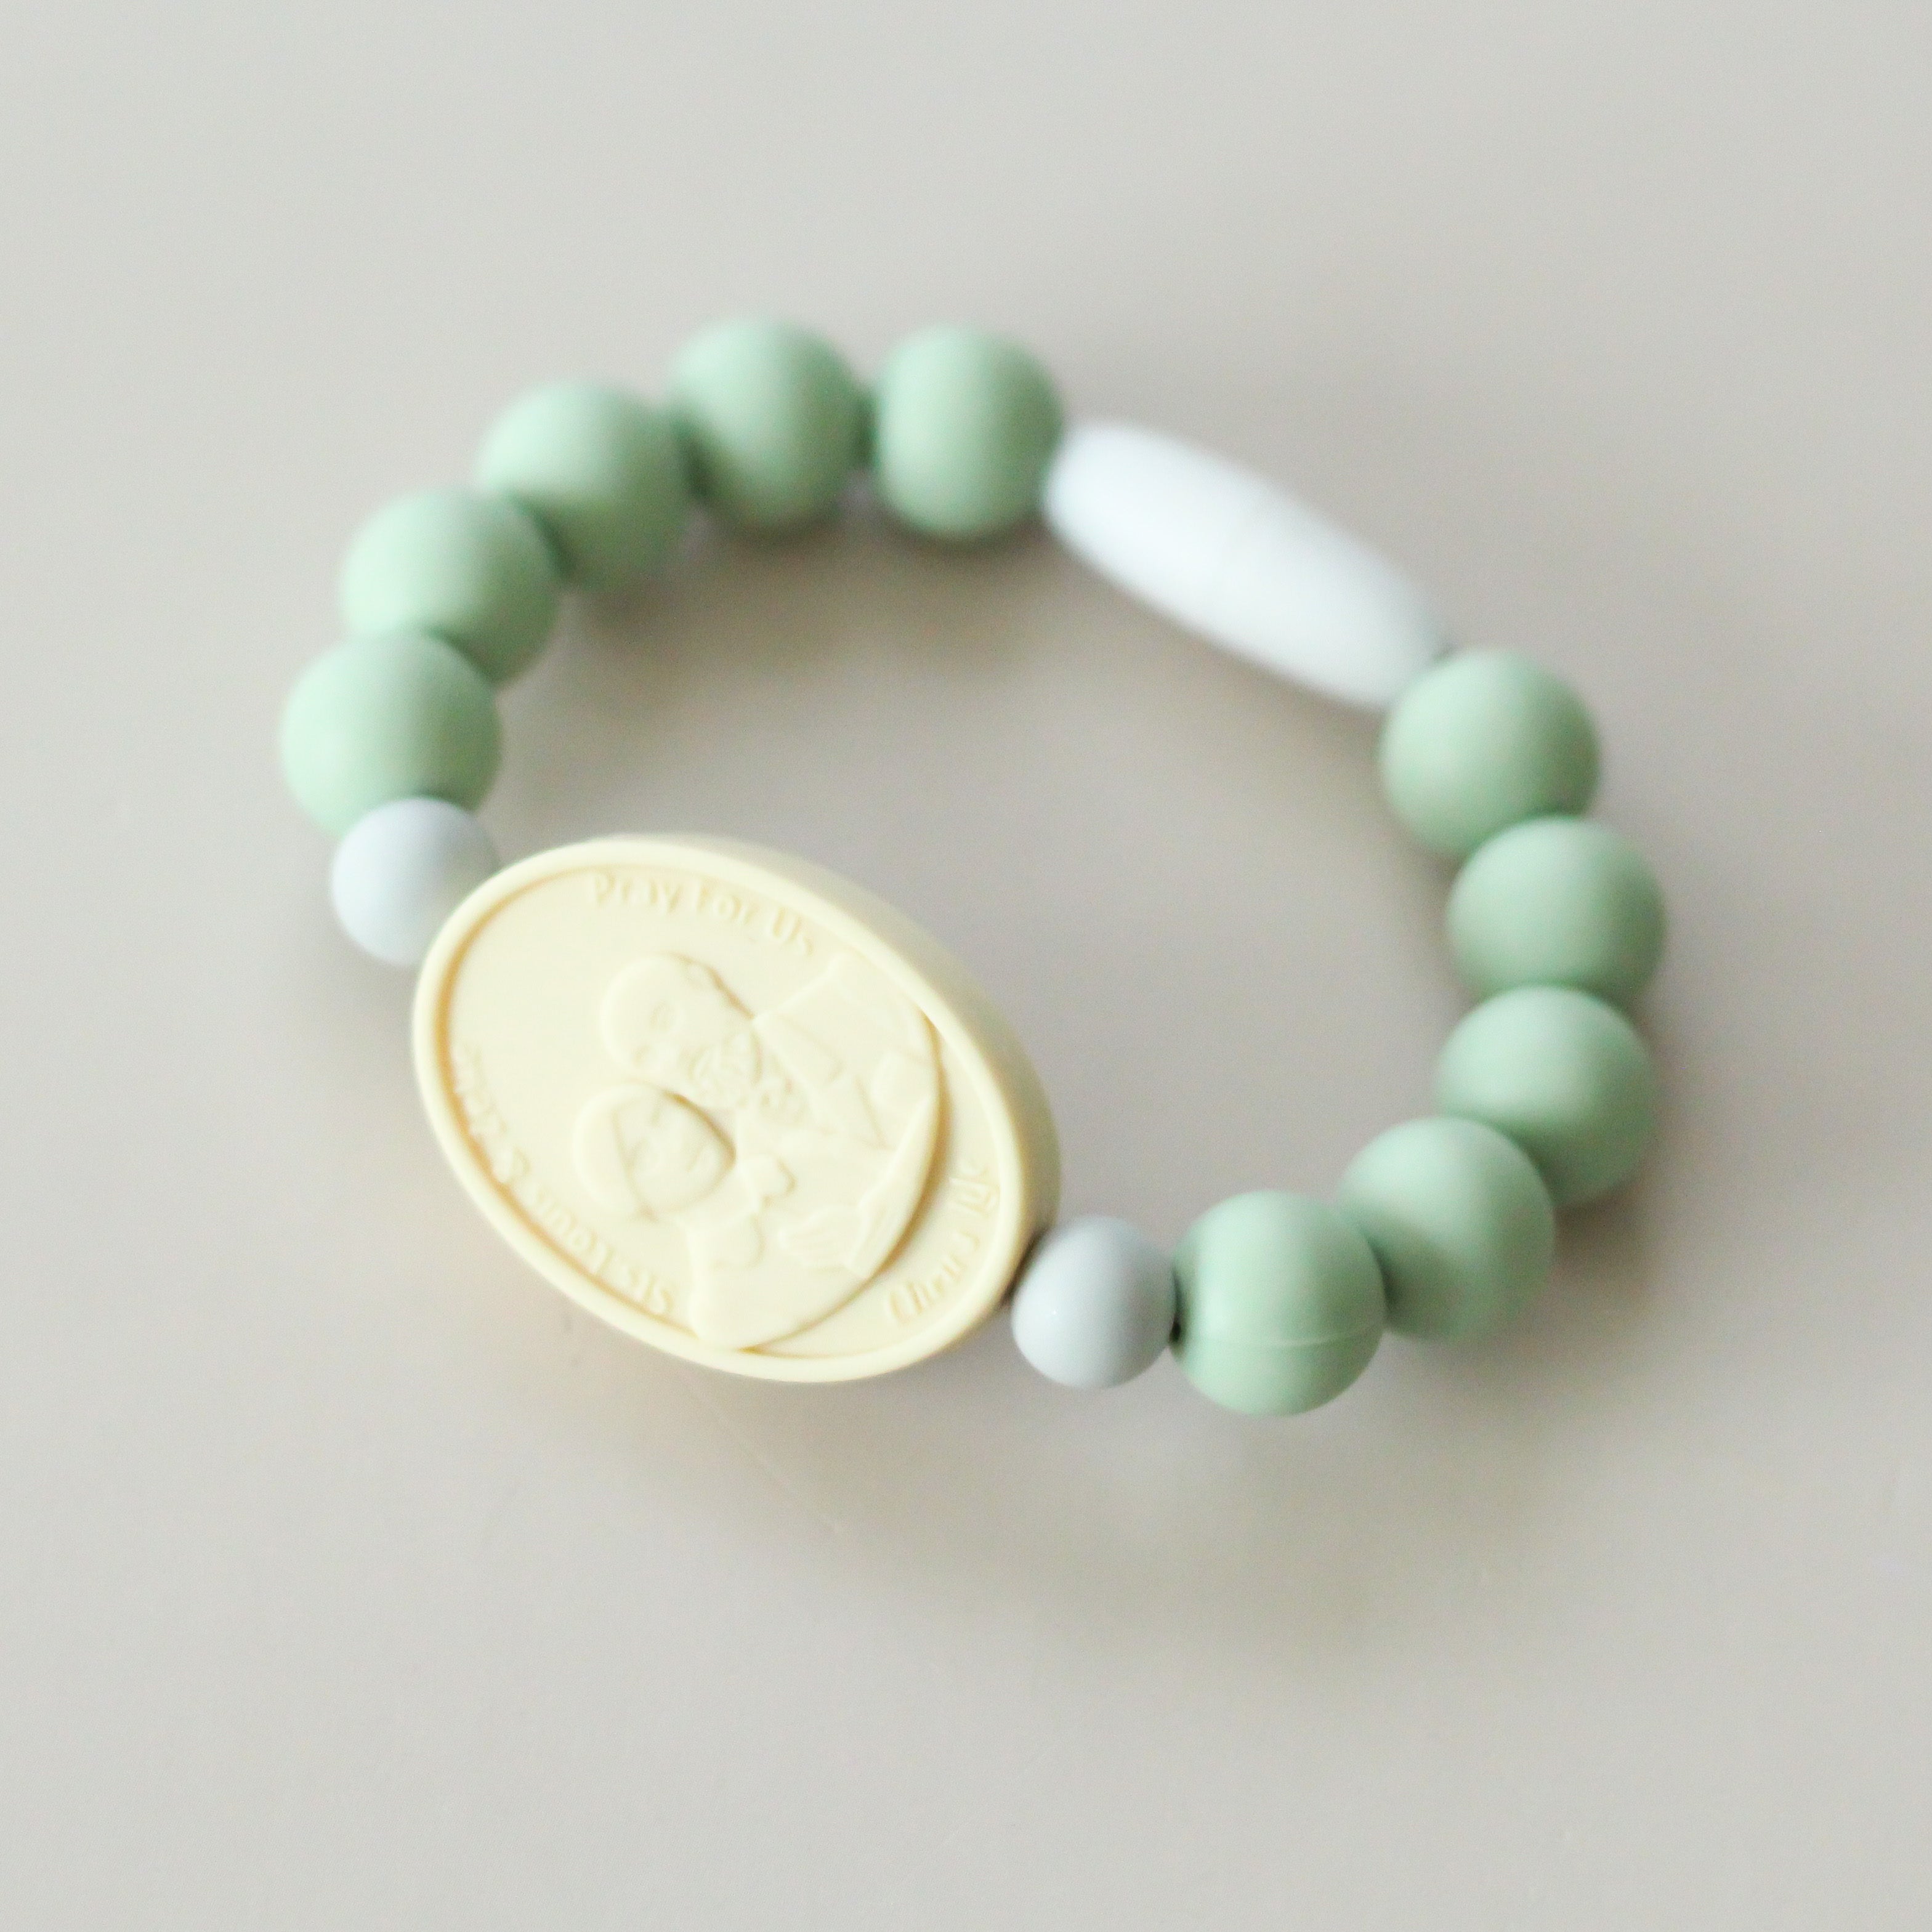 chews-life-st-therese-with-sts-zelie-and-louis-saint-bracelet-green-31349639905456.jpg